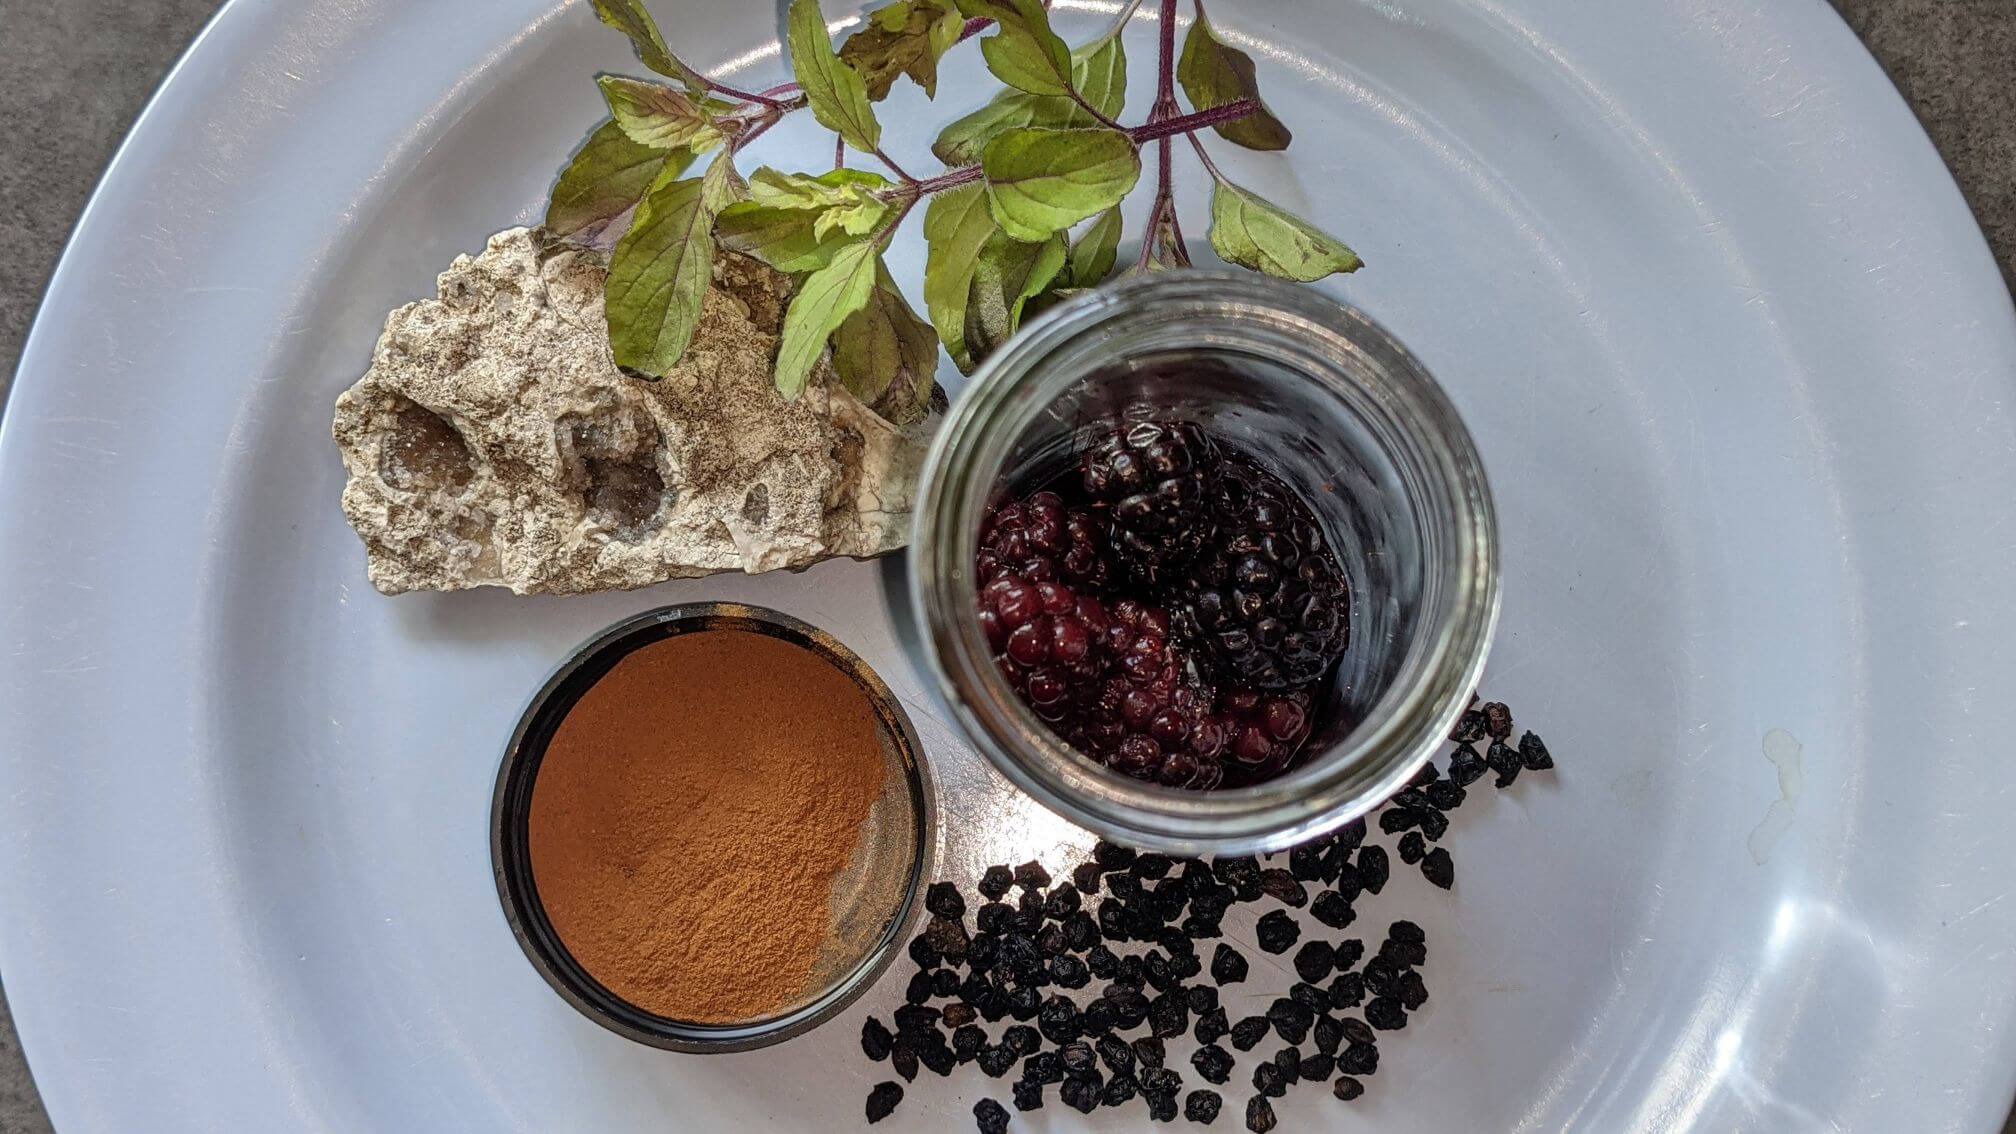 Thawed, frozen blackberries in a glass jar sit on a blue plate with a jar of cinnamon powder. Scattered next to the jars are dried elderberries. A druzy quartz and fresh tulsi are also on the plate.